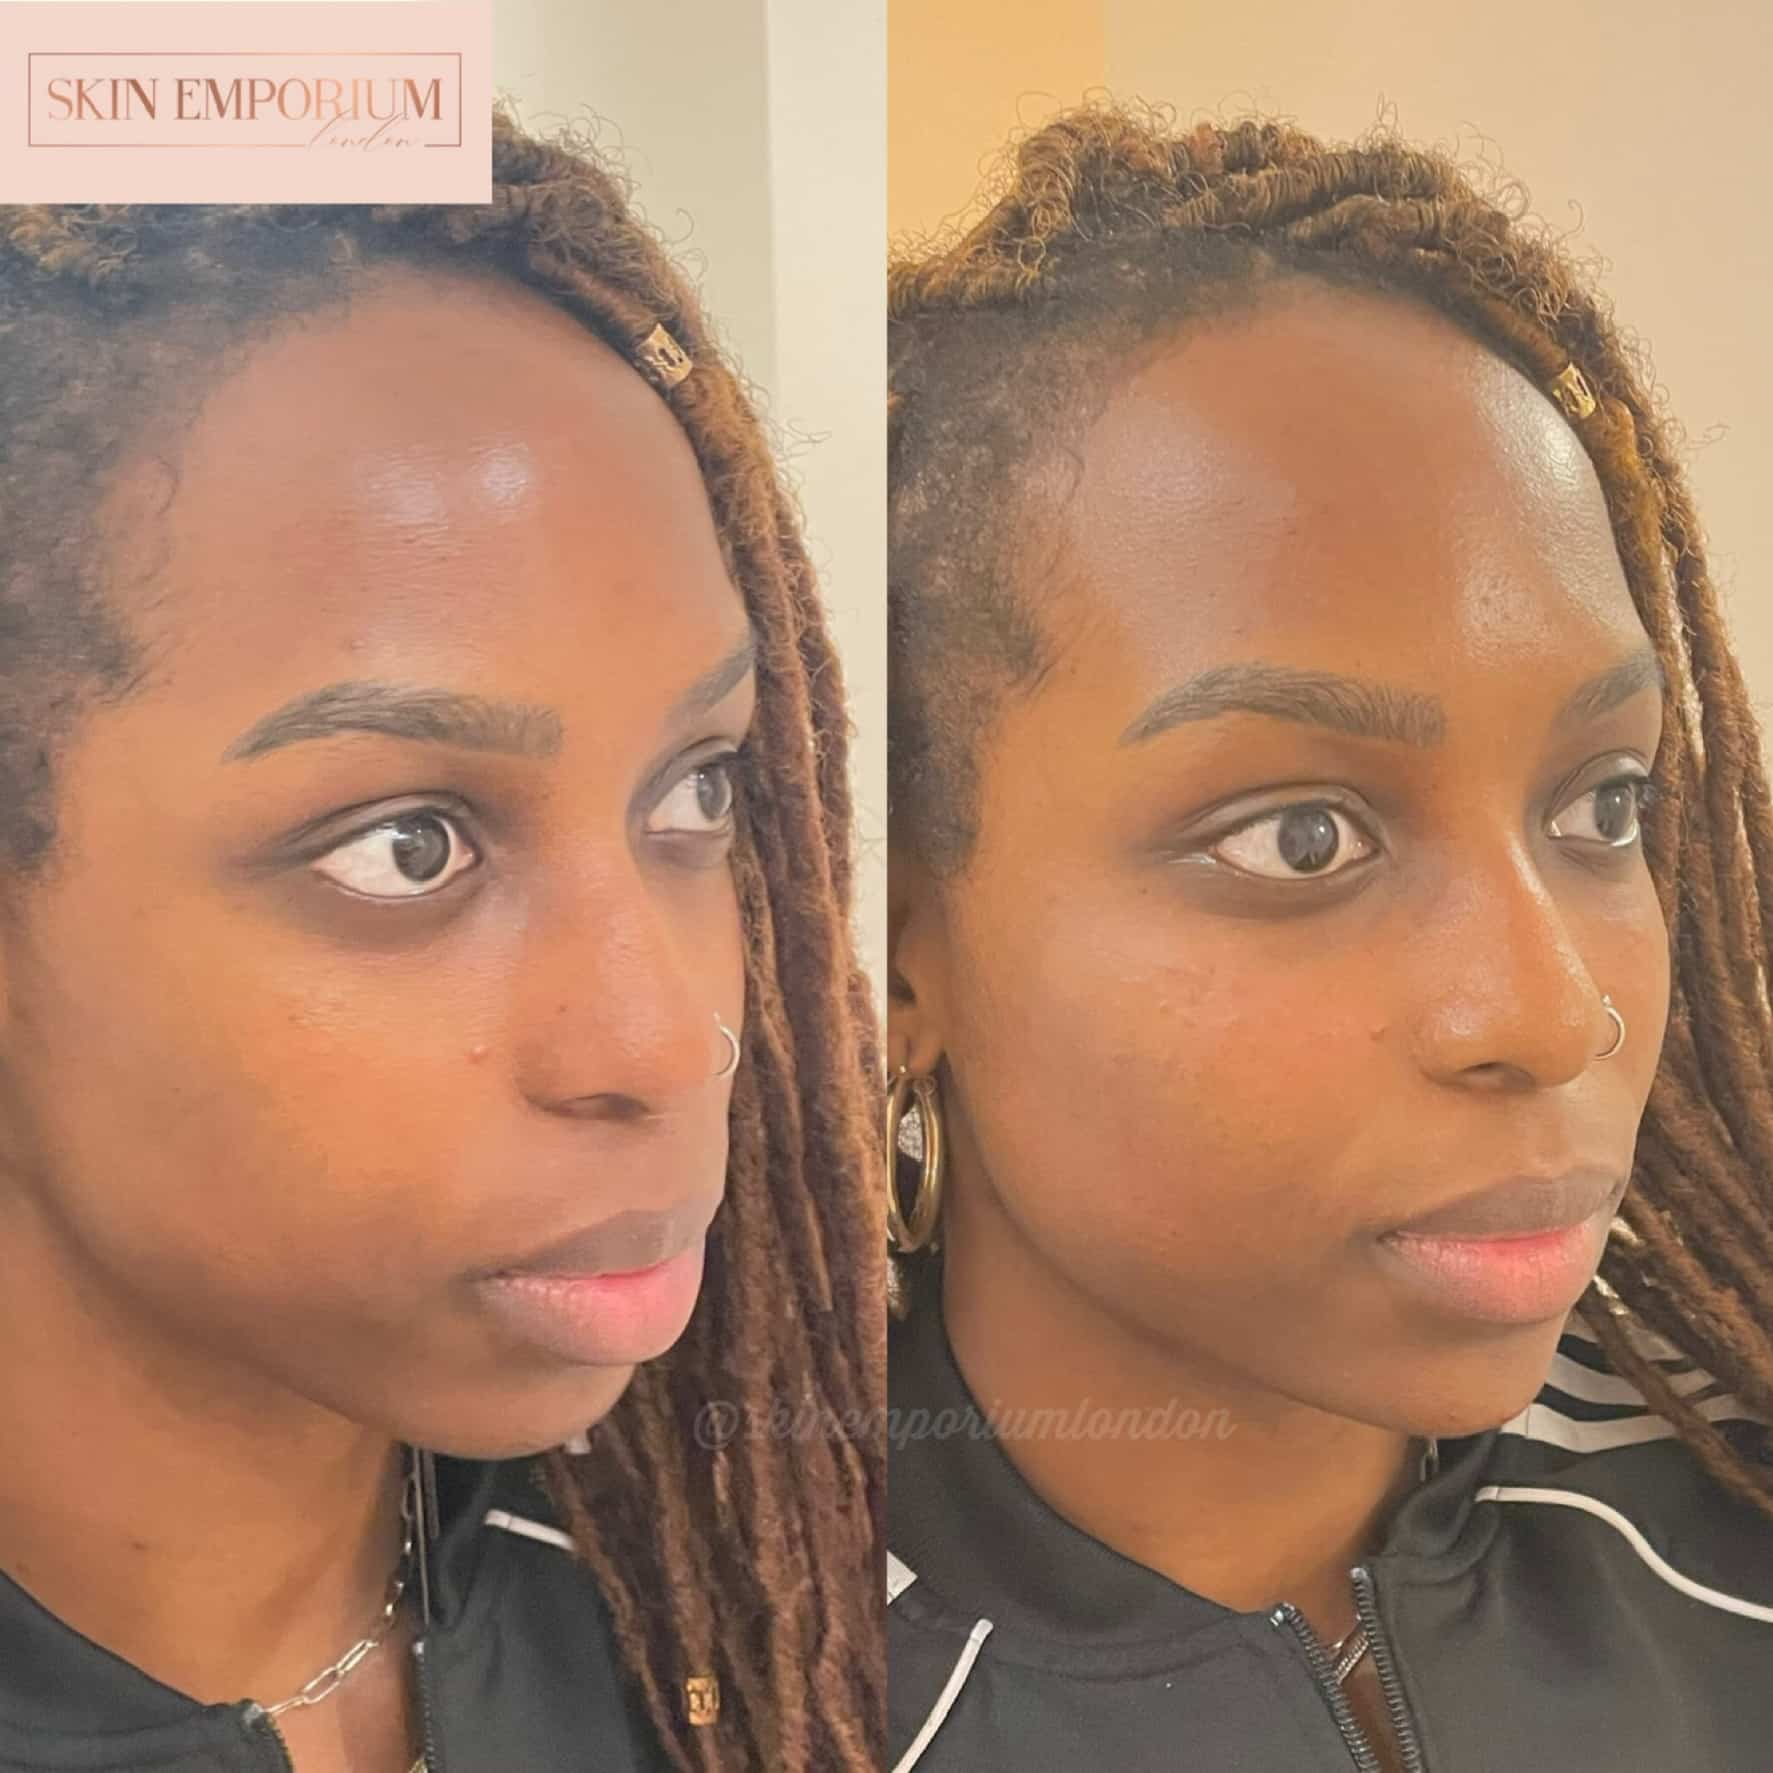 Before and after photo of a women having received lip filler treatment at the Skin Emporium in Clapham, London.